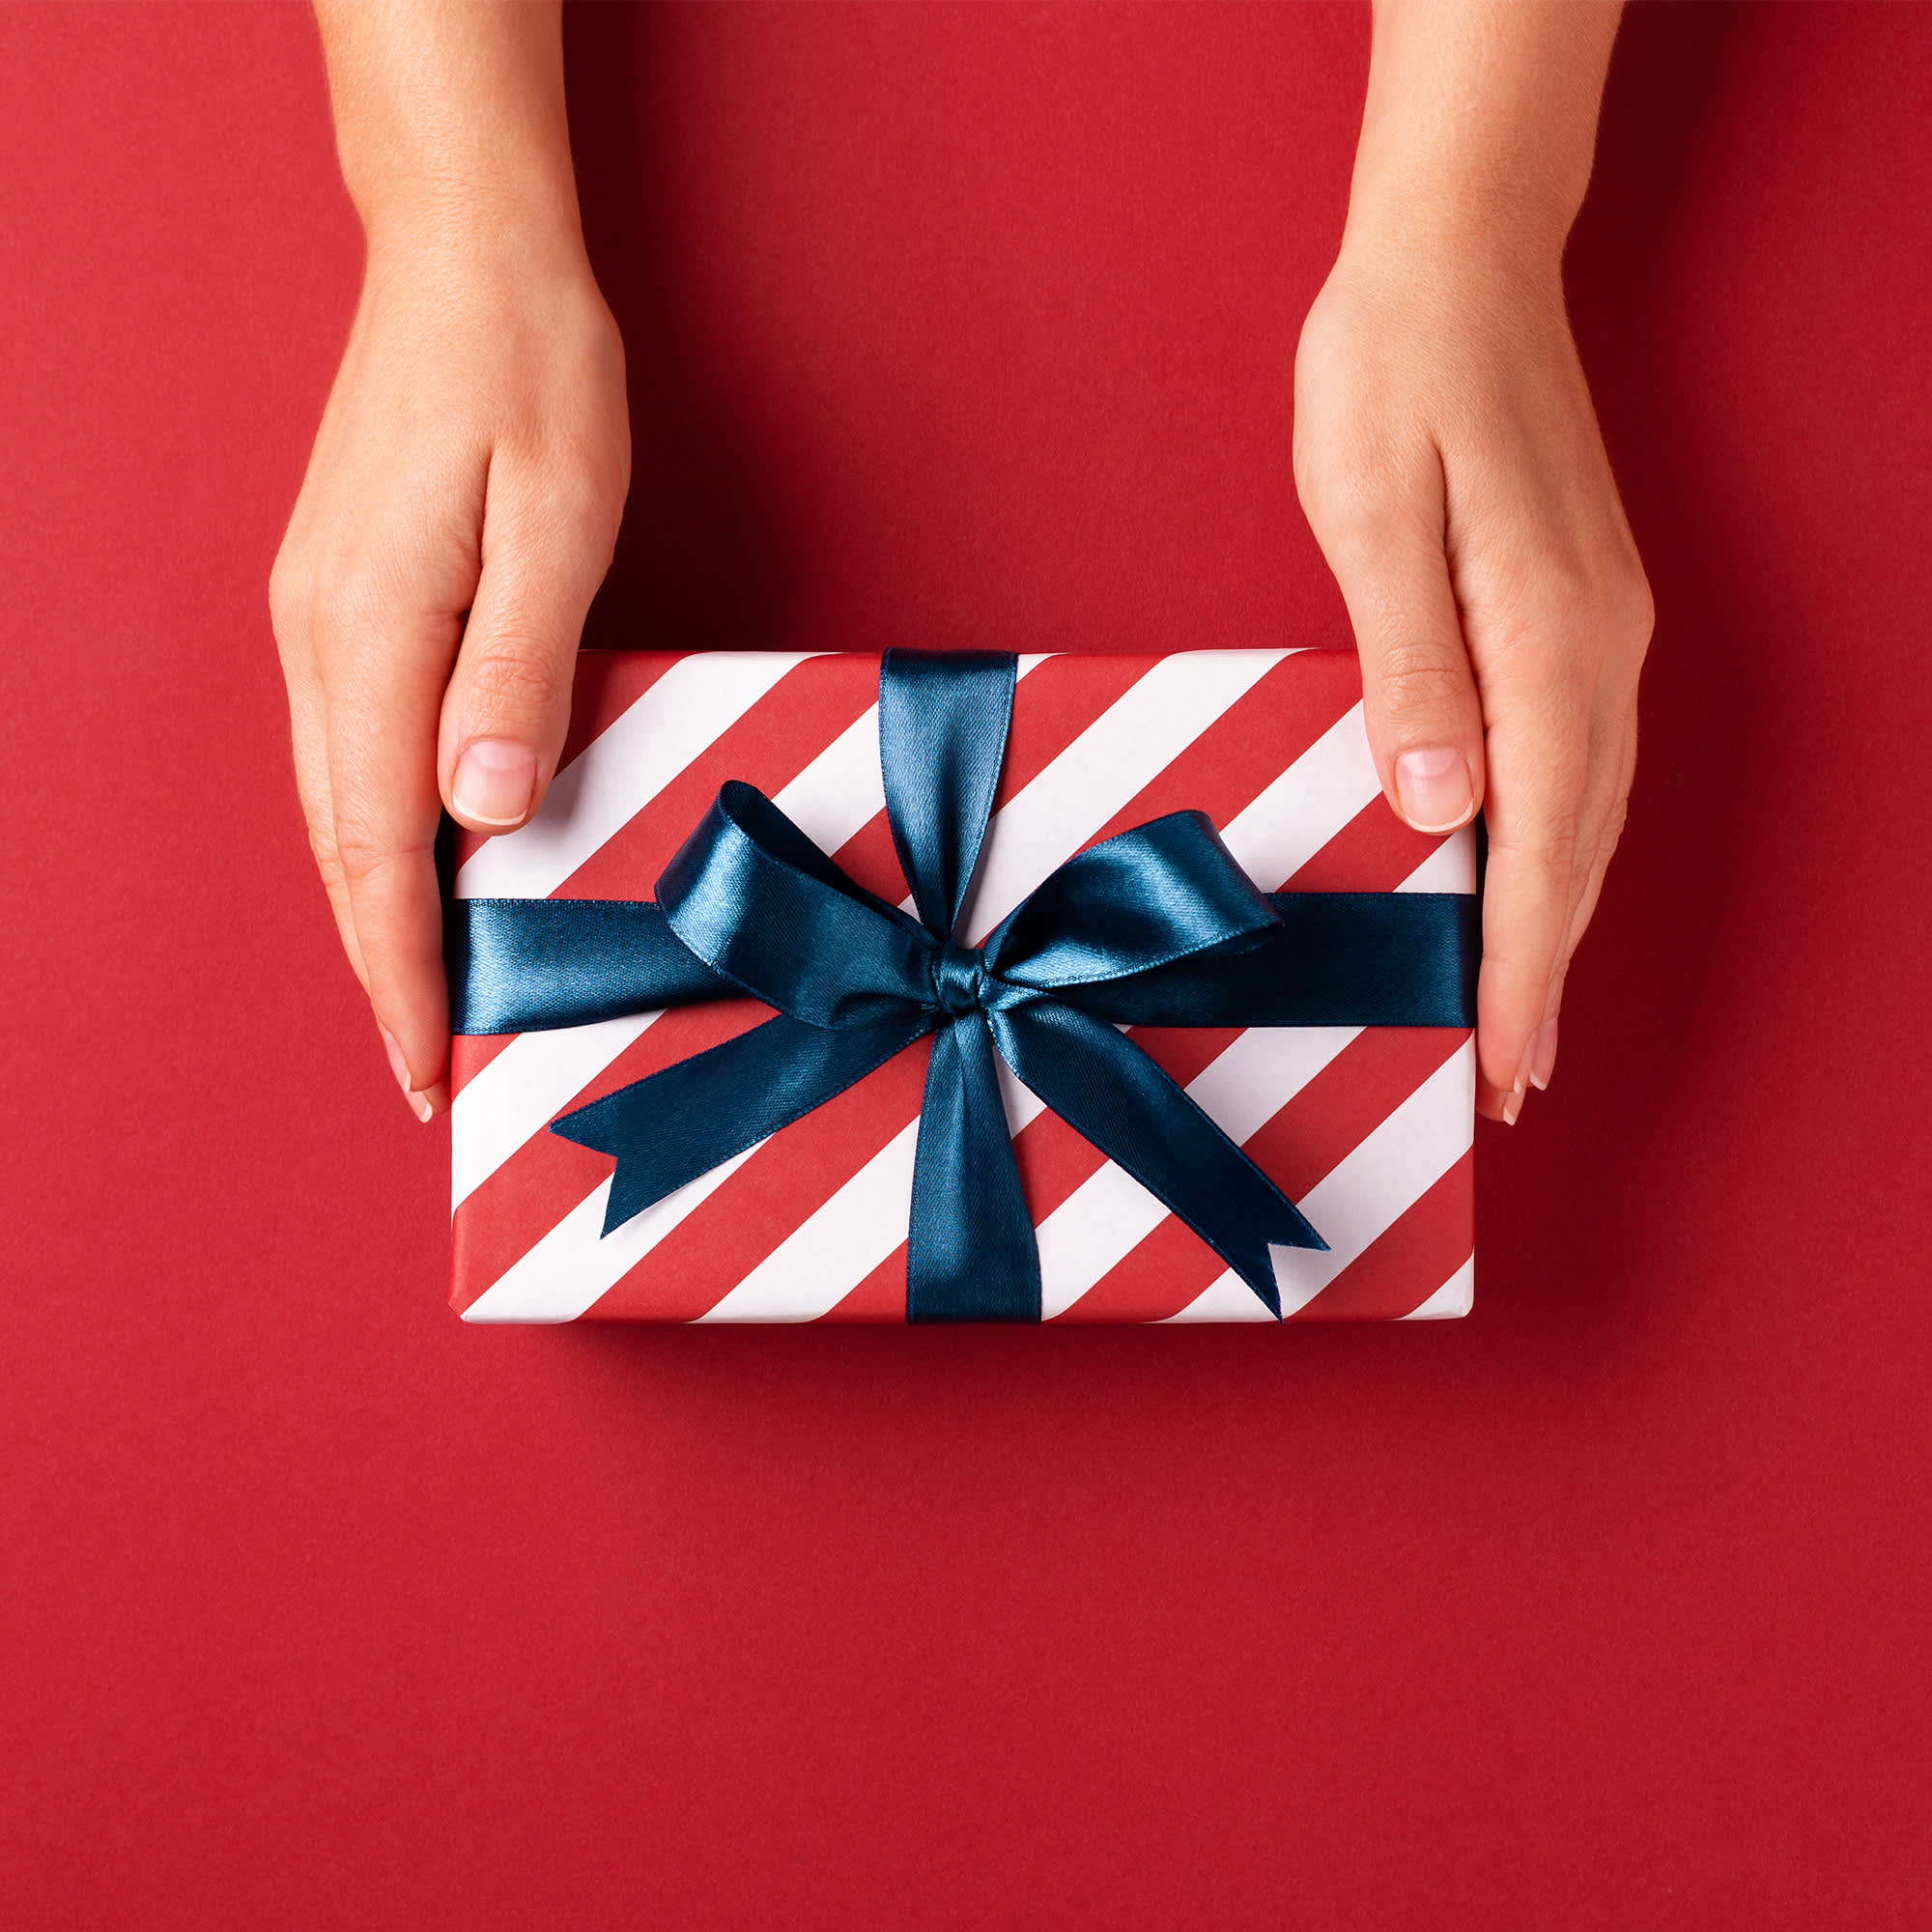 Don't miss the opportunity to grab the perfect gift! Give that special someone the chance to enjoy a unique experience in Valencia with this gift card.